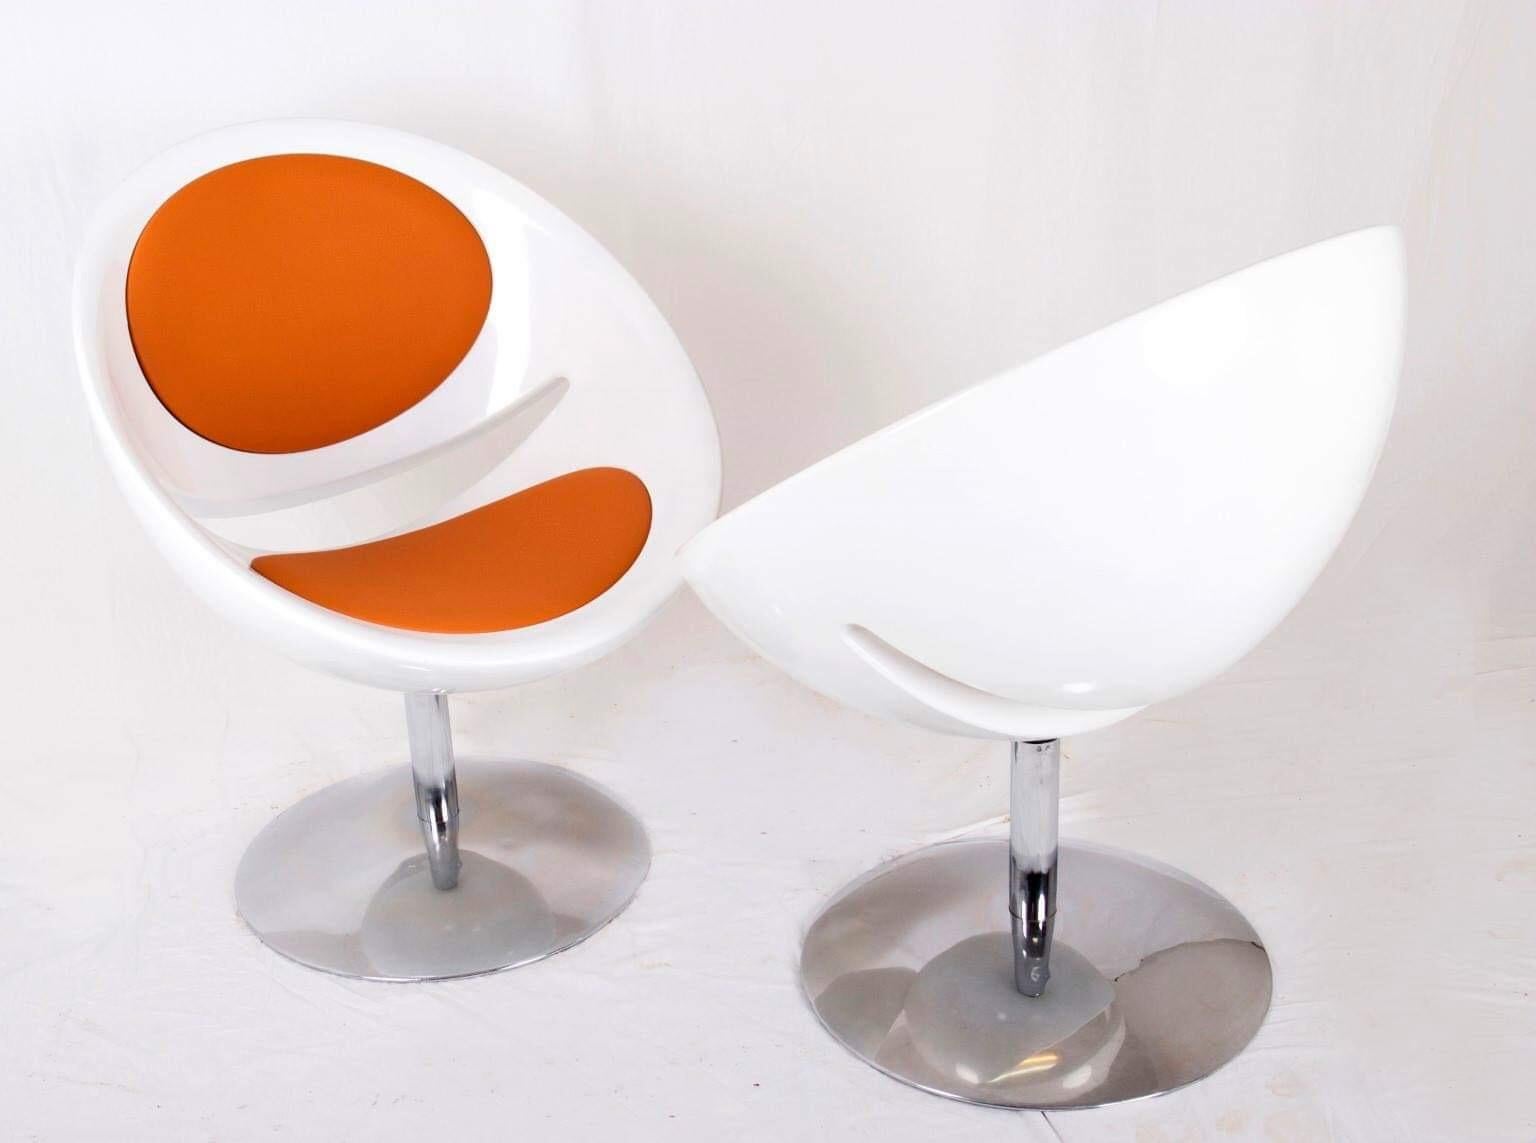 French Vintage Double Mirror Egg Armchairs Designed by Pierre Guariche In Good Condition For Sale In Gyermely, Komárom-Esztergom